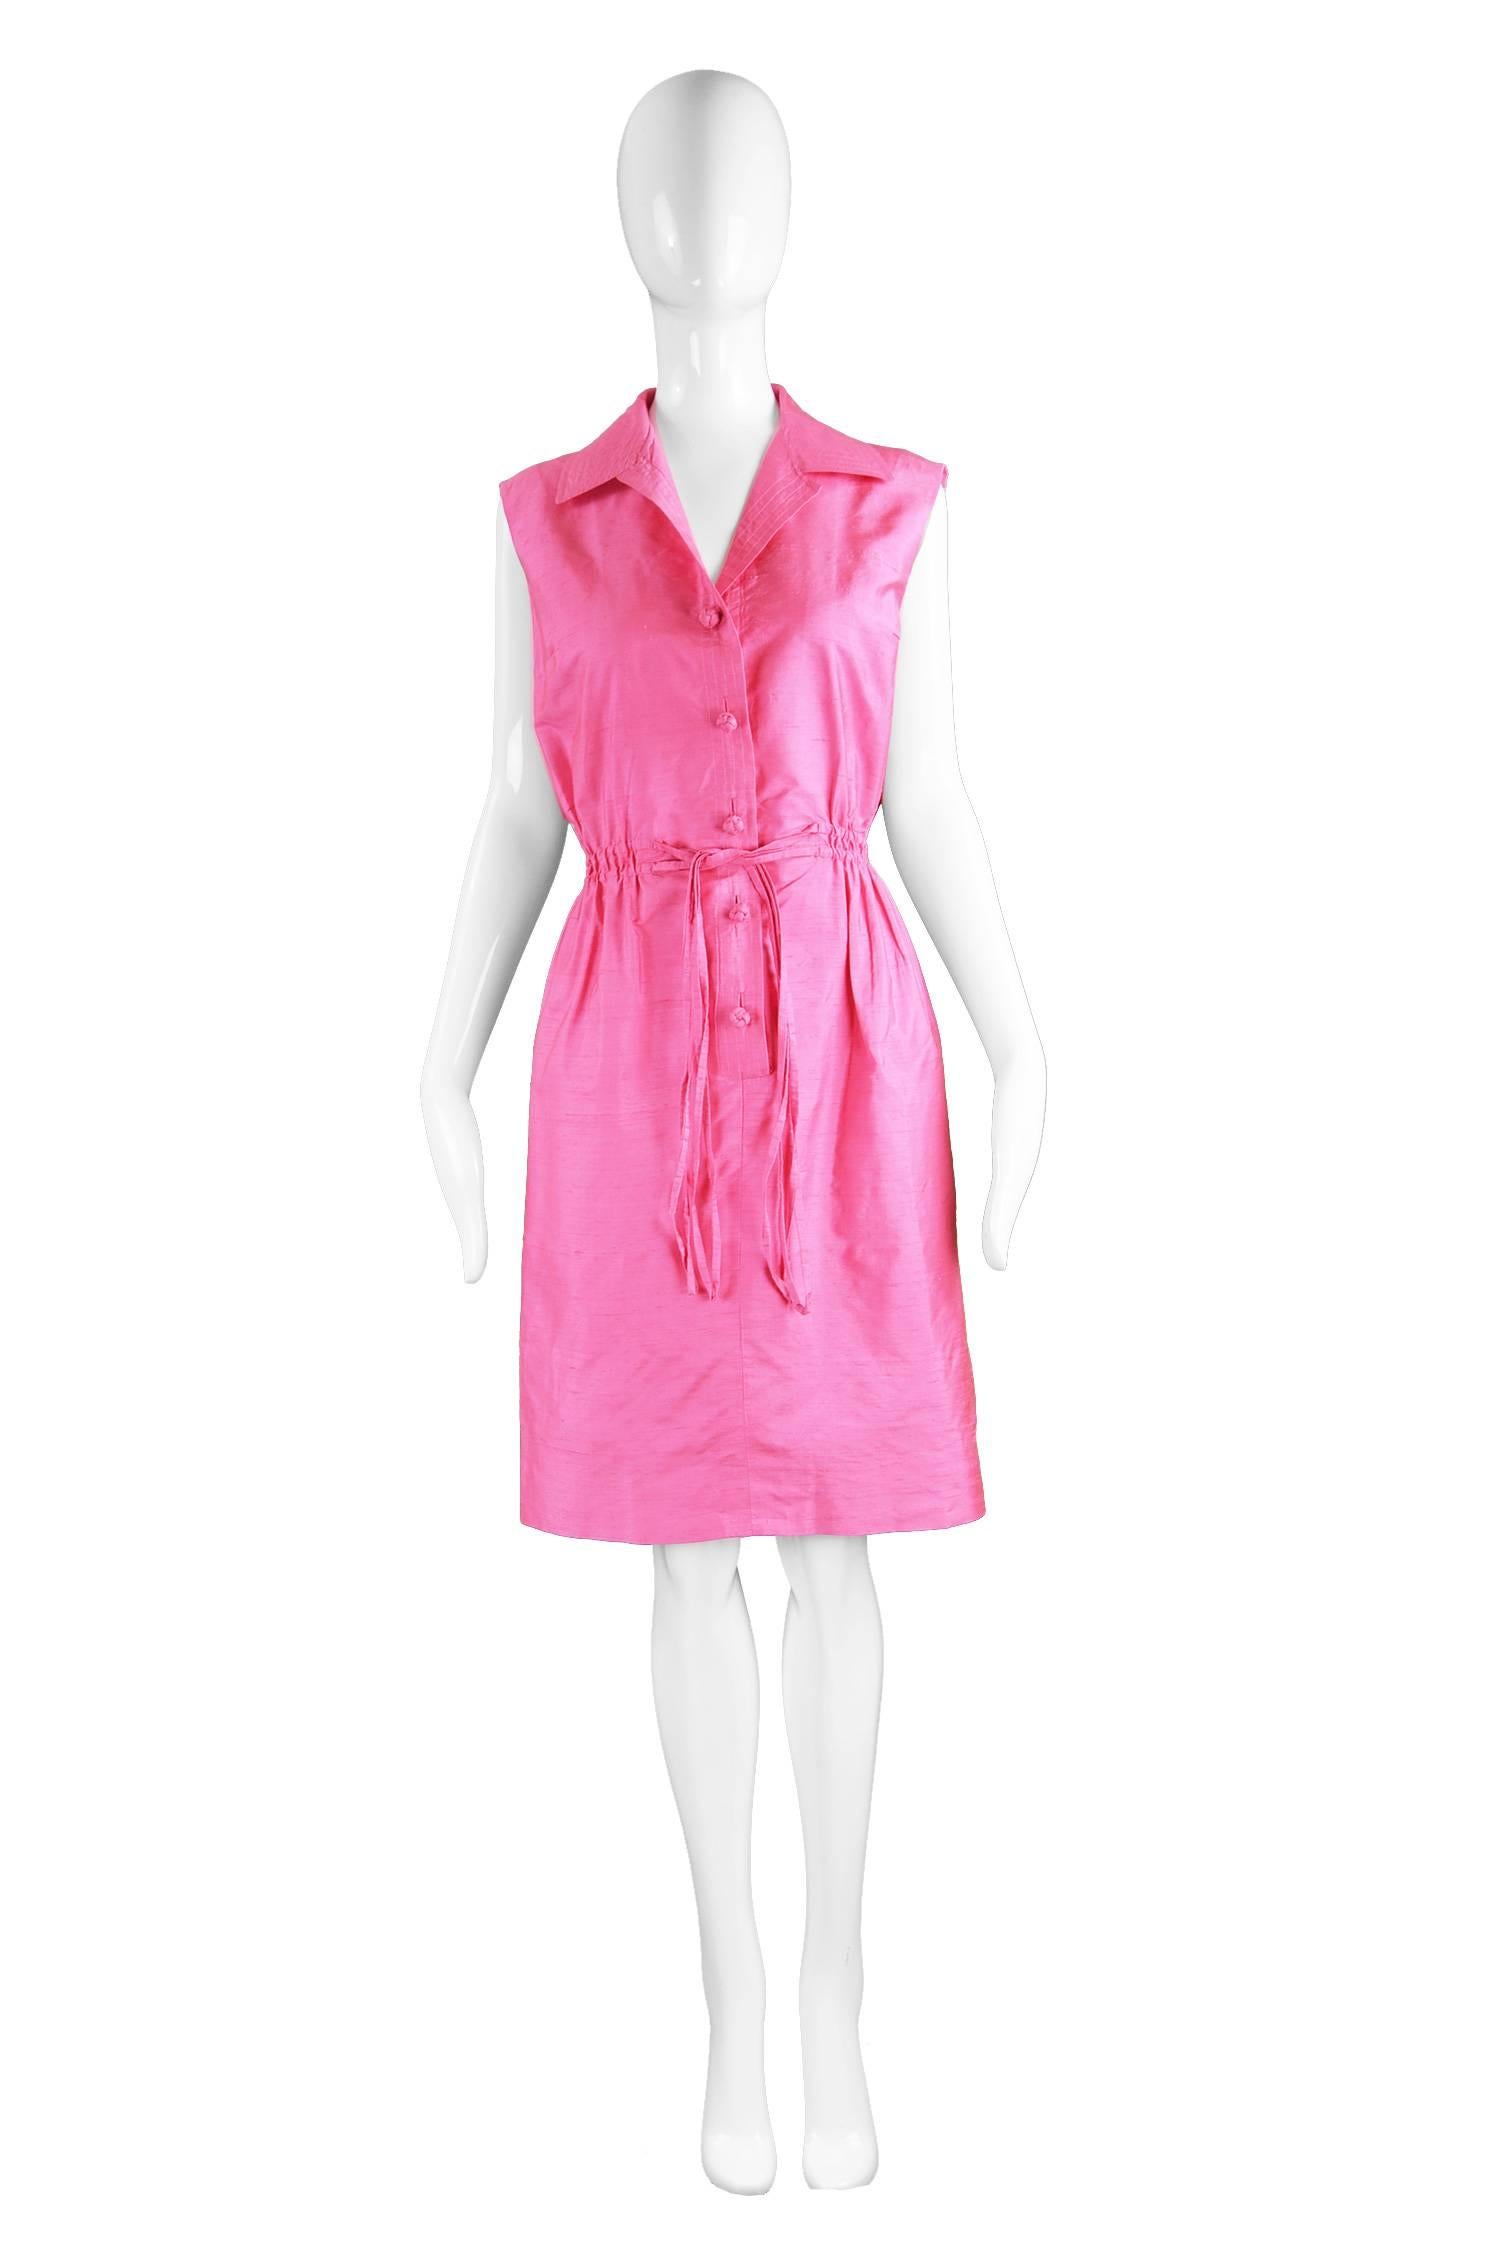 Carven Paris Shocking Pink Silk Shantung Sleeveless Shirt Dress, 1960s

Size: fits like a UK 10-12/ US 6-8/ EU 38-40. Please check measurements. 
Bust - up to 38” / 96cm (has a loose fit on top)
Waist - Stretches from 26-32” / 66-81cm
Hips - 38” /